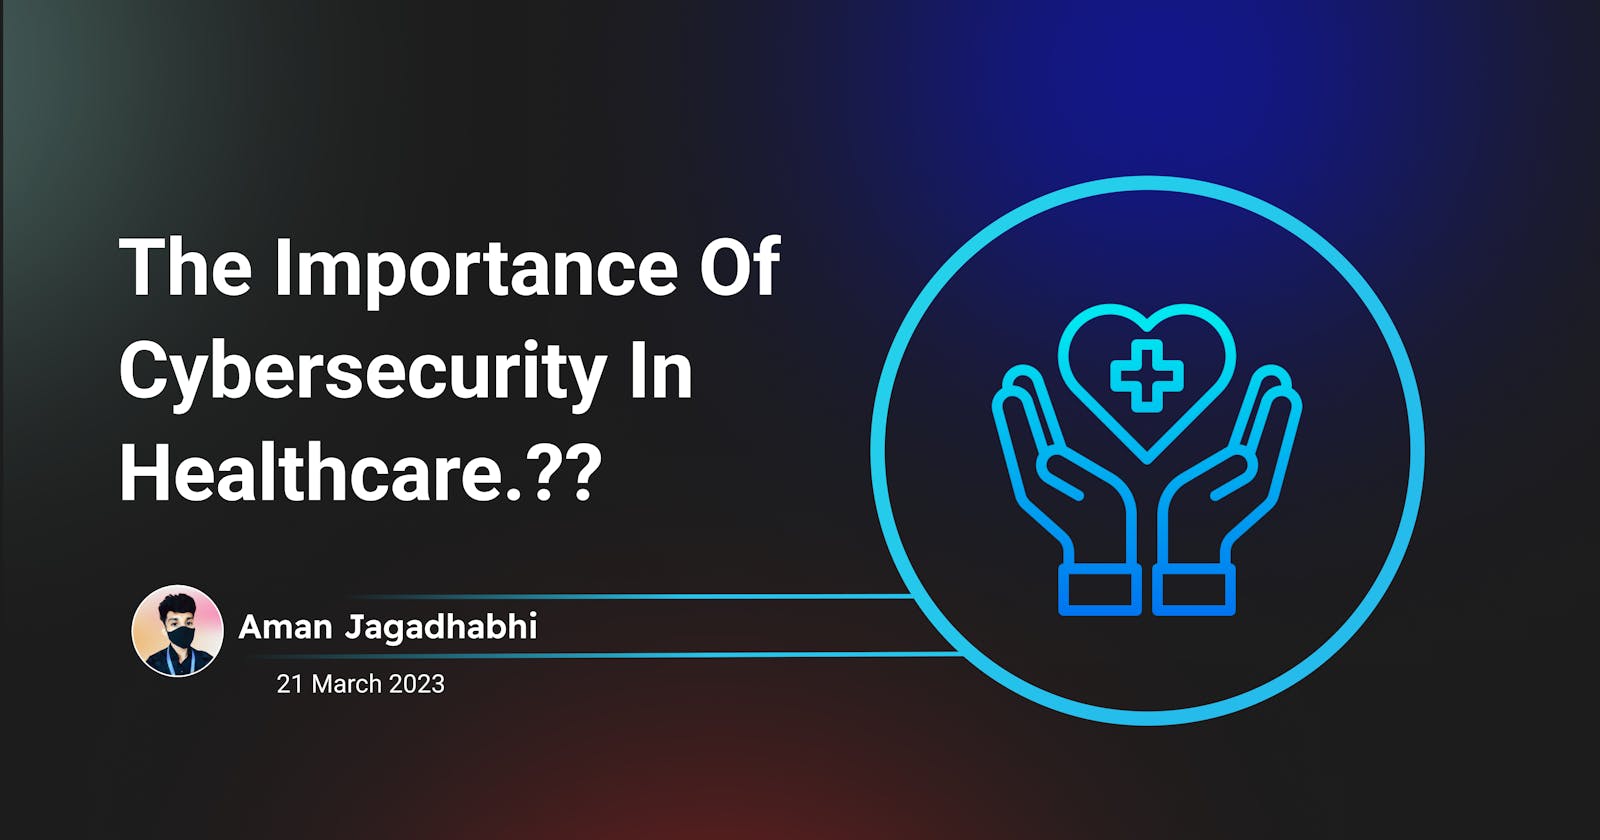 The Importance Of Cybersecurity In Healthcare.??